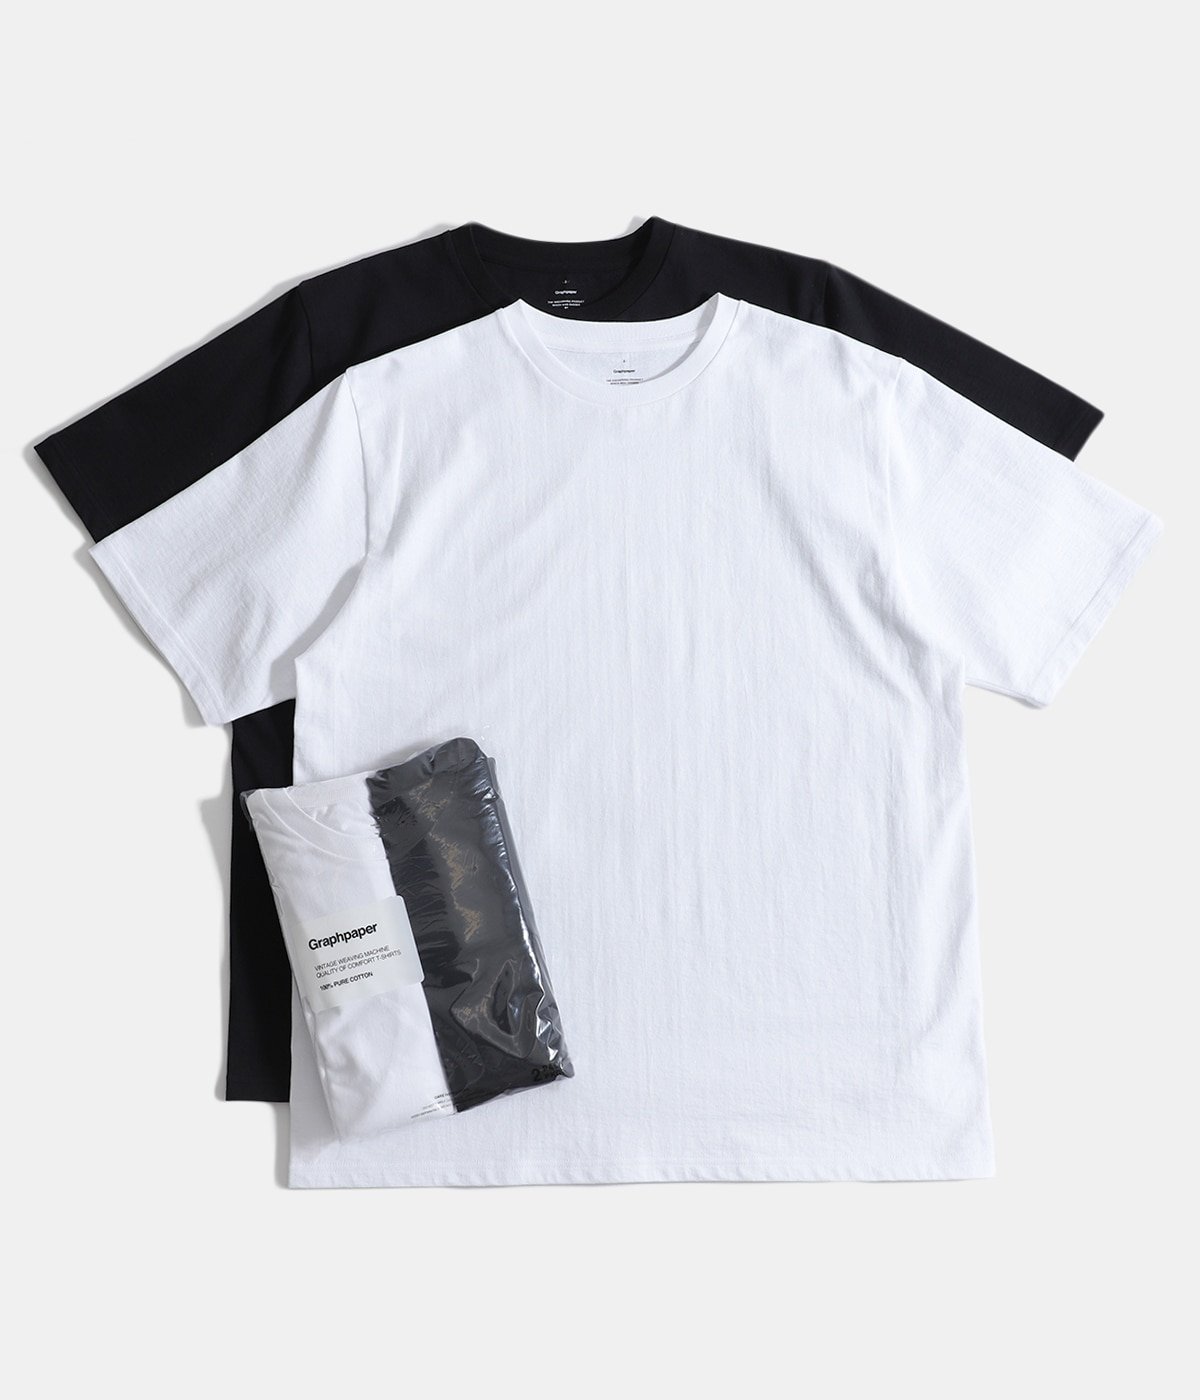 ONLY ARK】別注 2-Pack Crew Neck Tee | Graphpaper(グラフペーパー